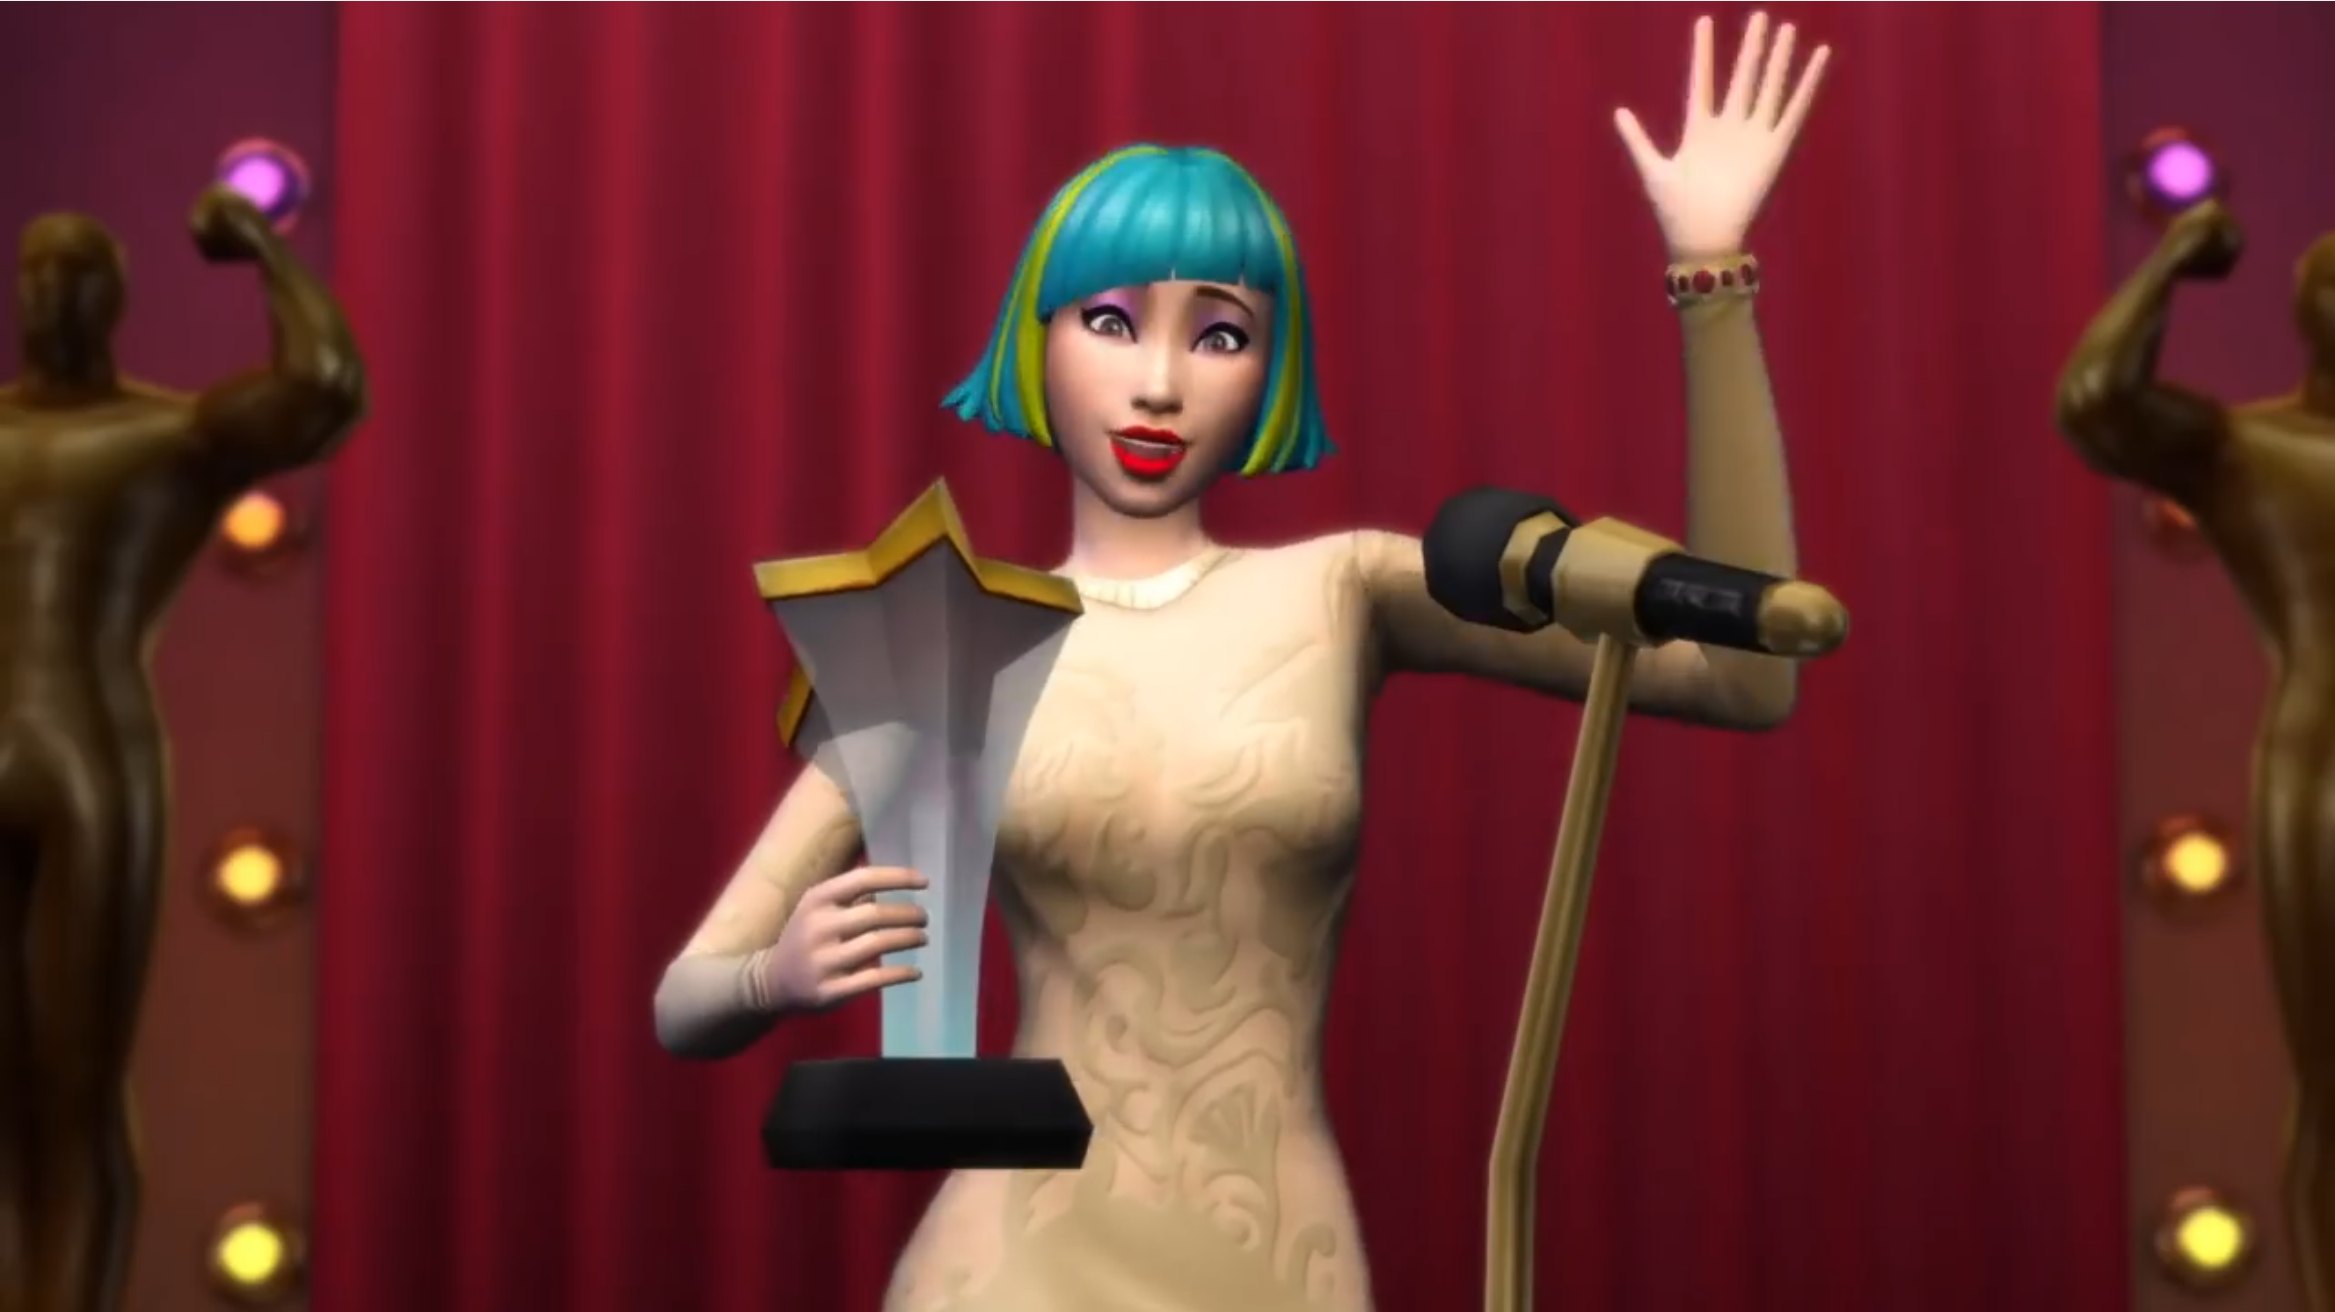 the sims 4 Moschino pack is pretty cool - Forum - Virtual Popstar